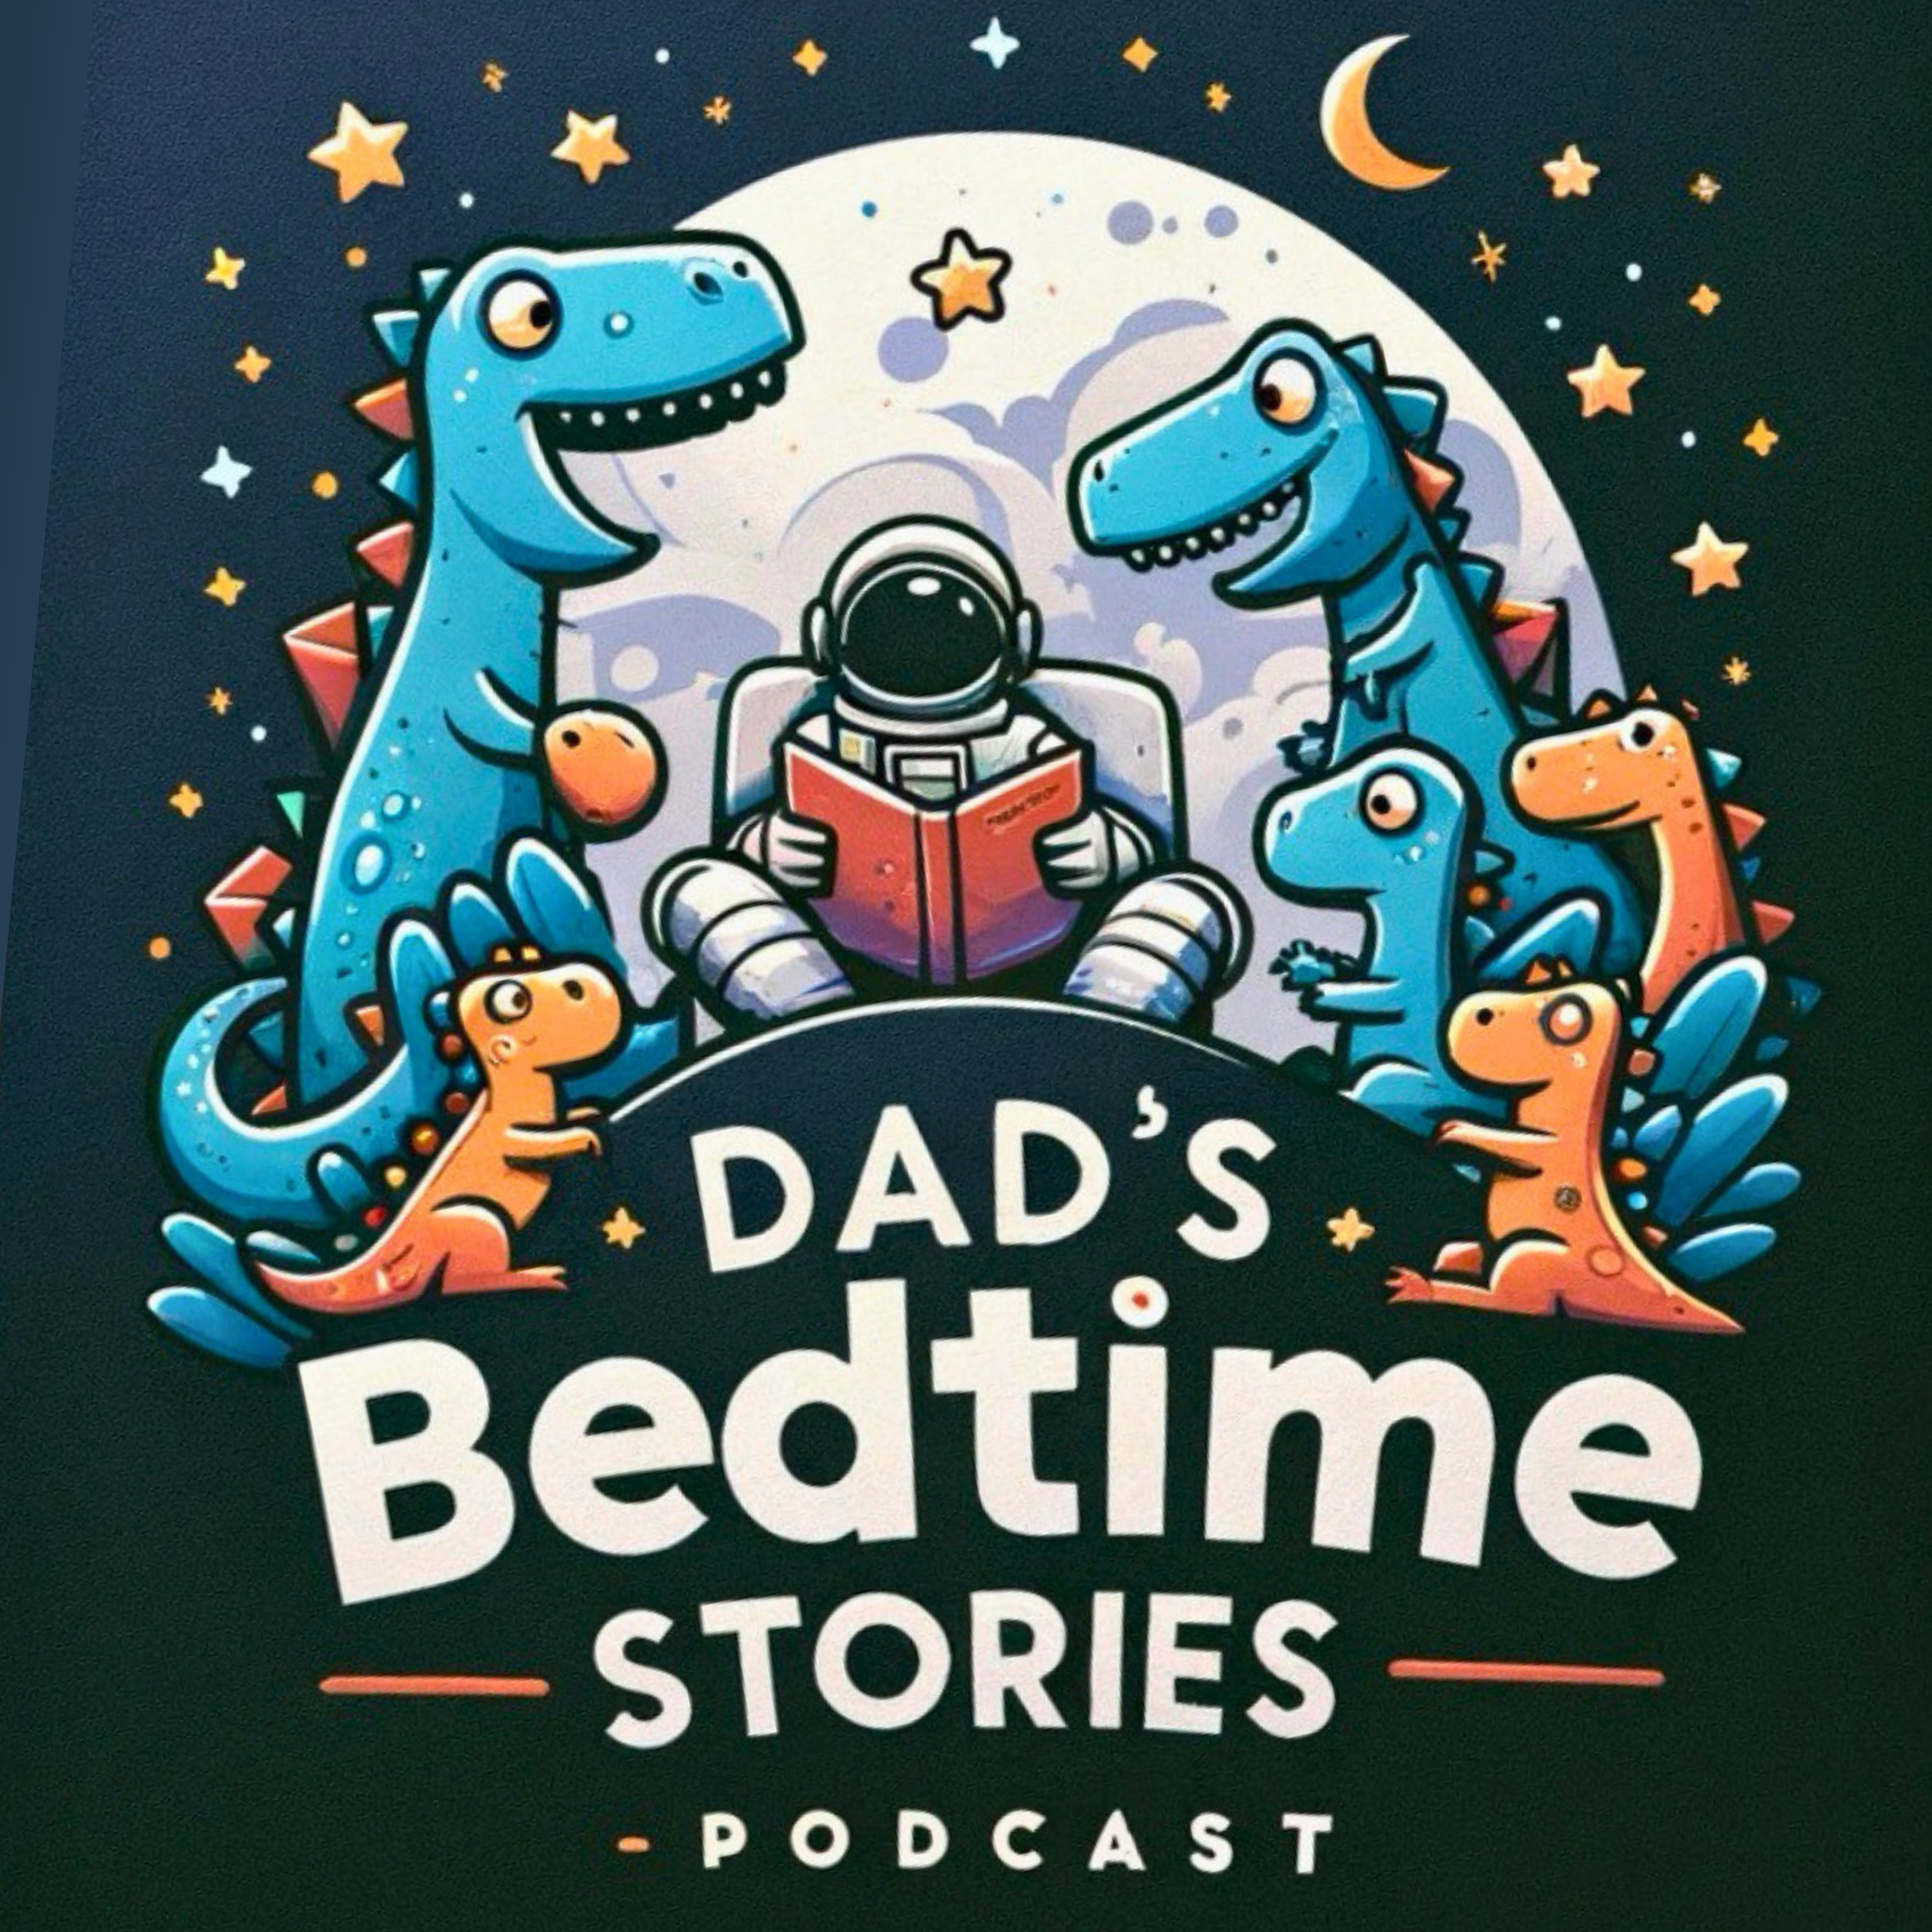 Dad's Bedtime Stories For Kids